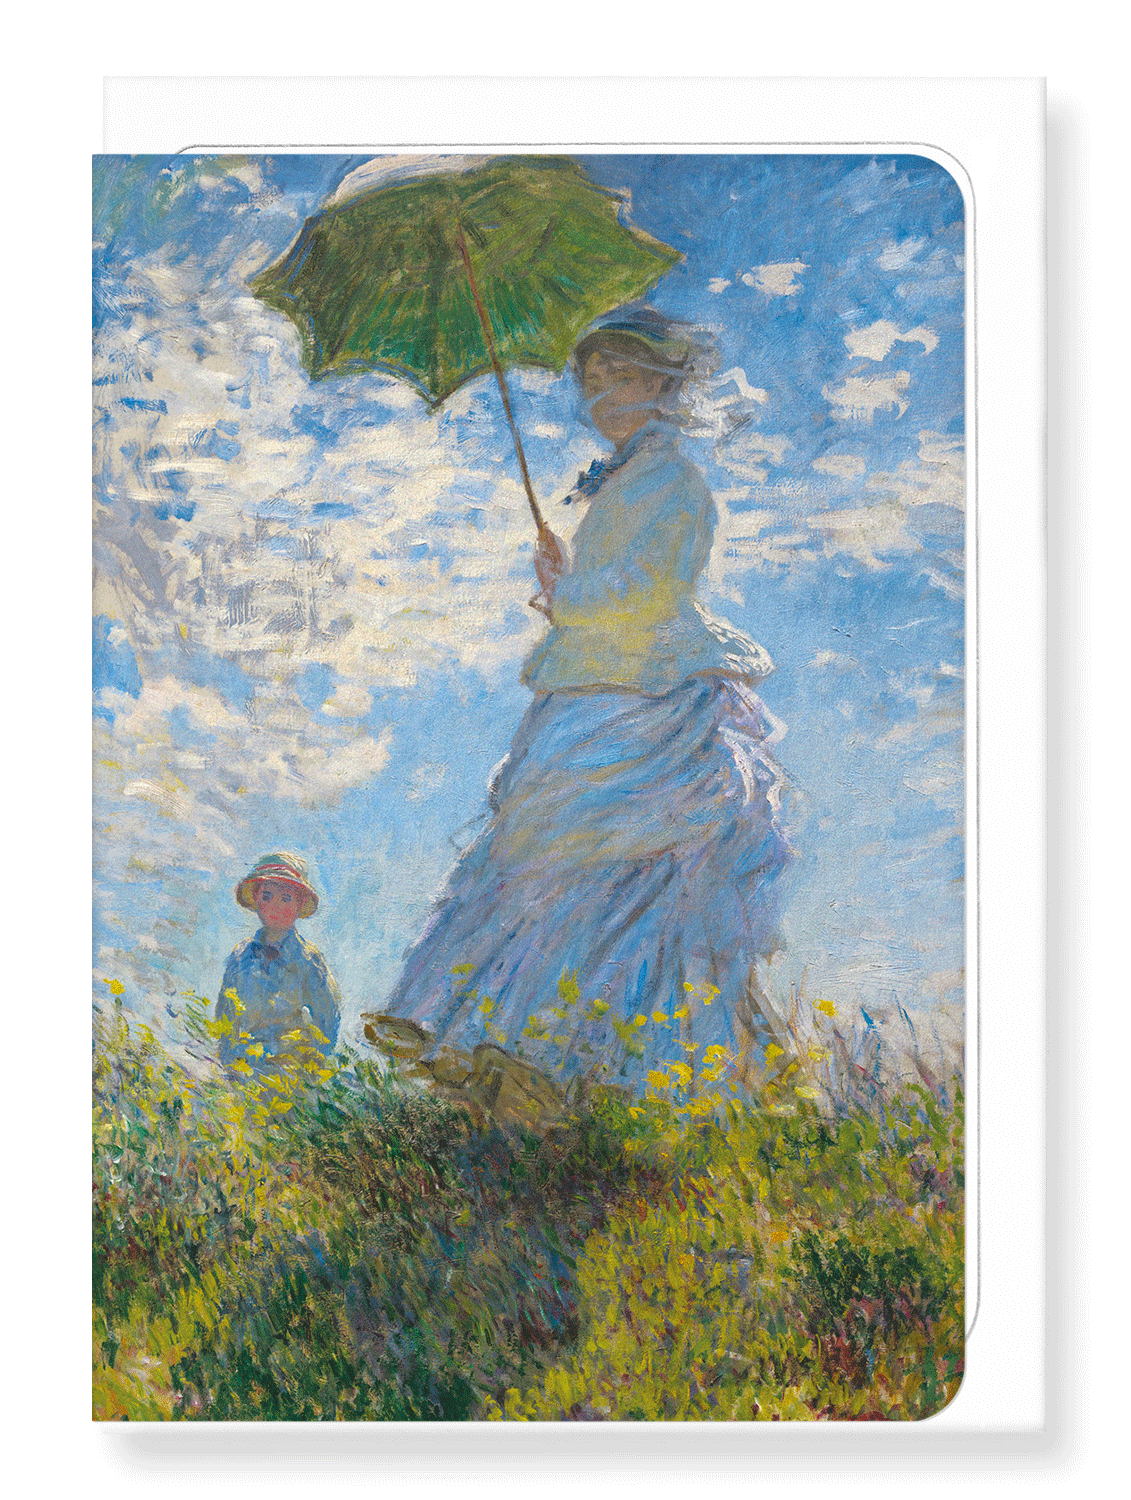 Ezen Designs - Lady with a parasol by monet - Greeting Card - Front